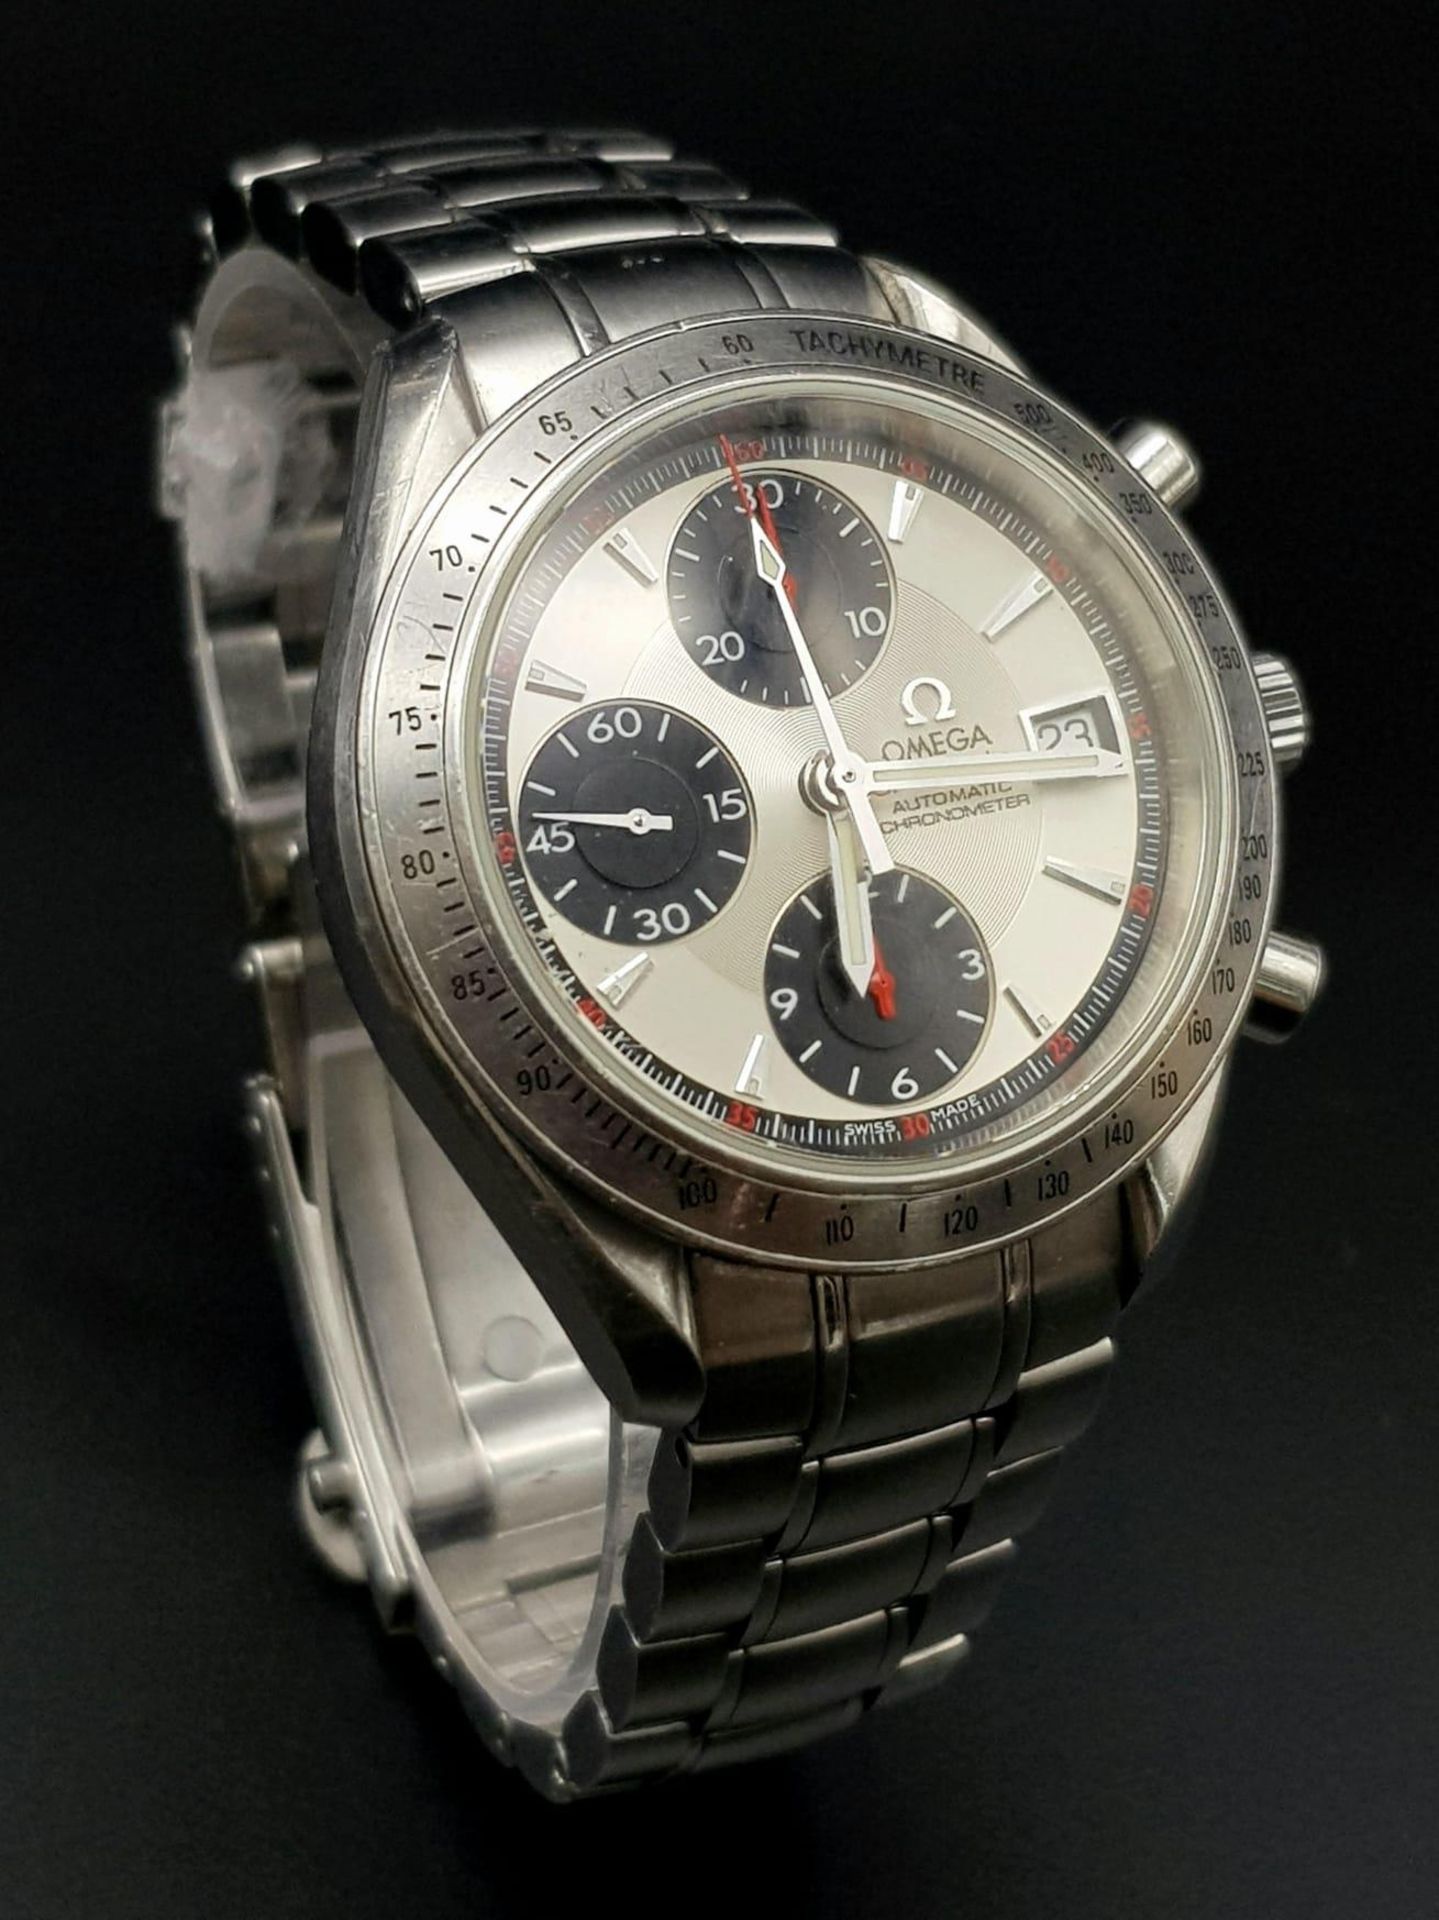 AN OMEGA "SPEEDMASTER"CHRONOMETER AUTOMATIC WITH 3 SUBDIALS AND DATE BOX IN ORIGINAL BOX . 40mm - Image 2 of 8